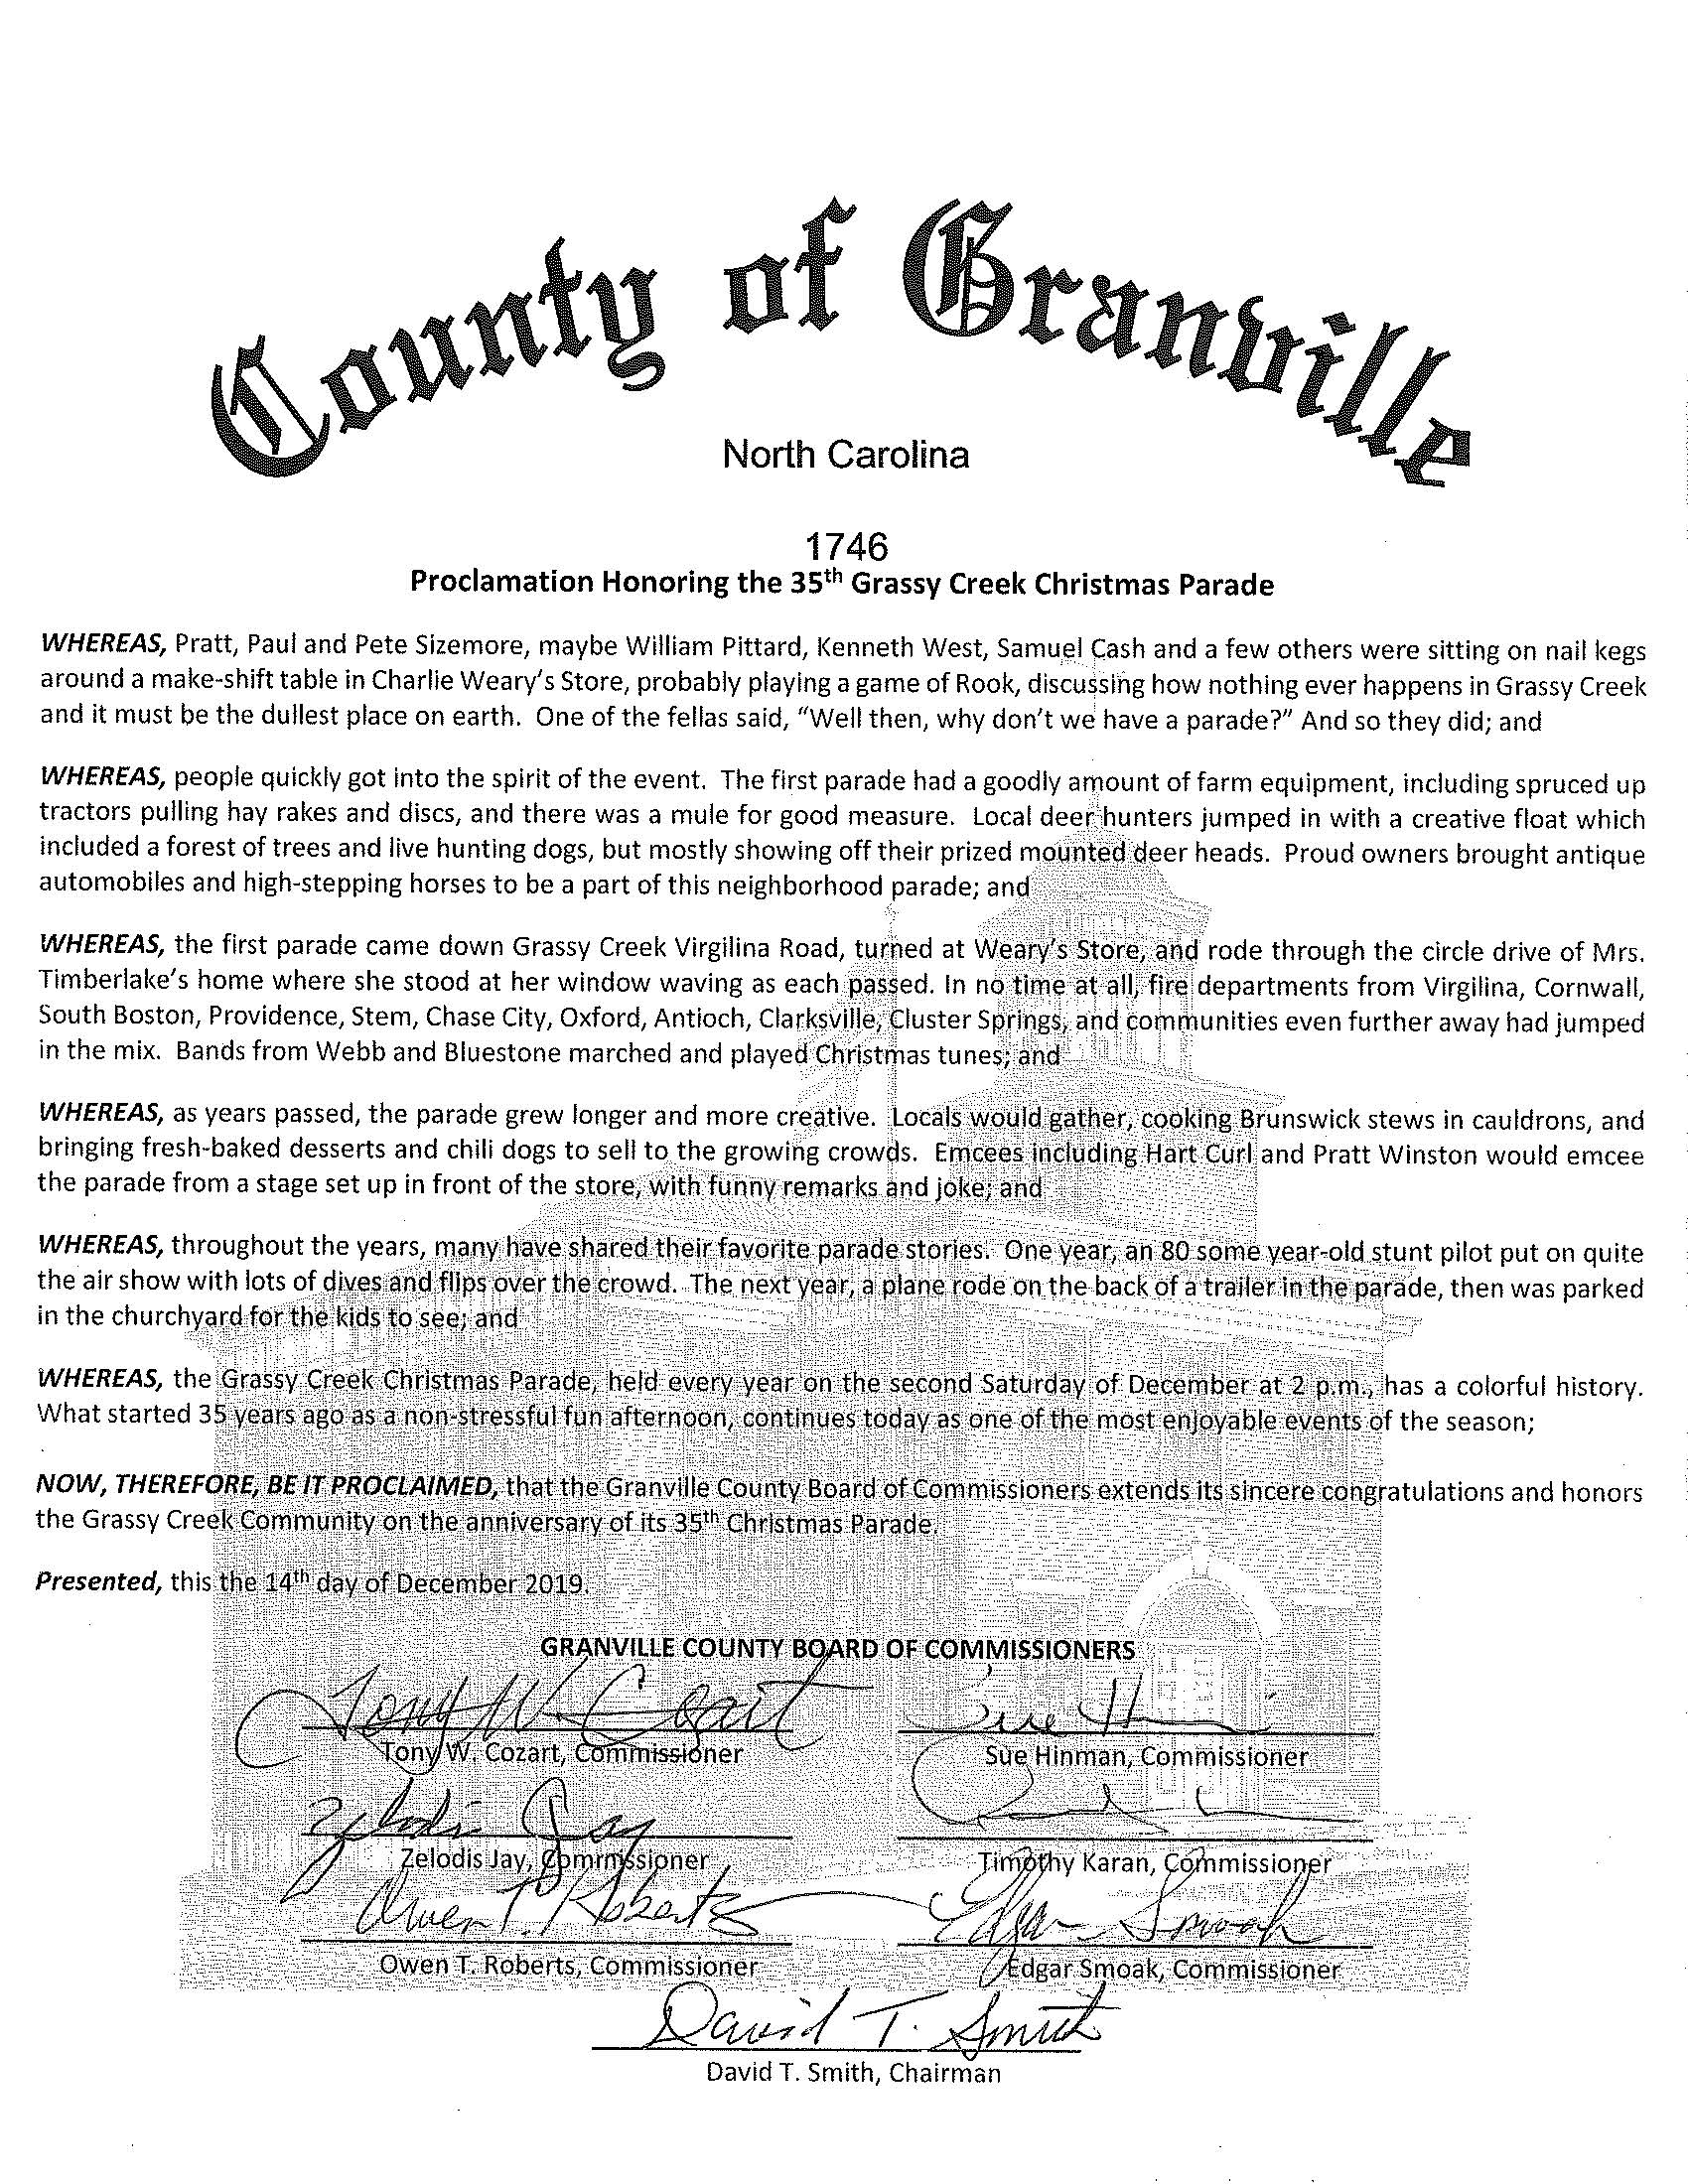 Commissioners issue proclamation for parade anniversary - Granville County